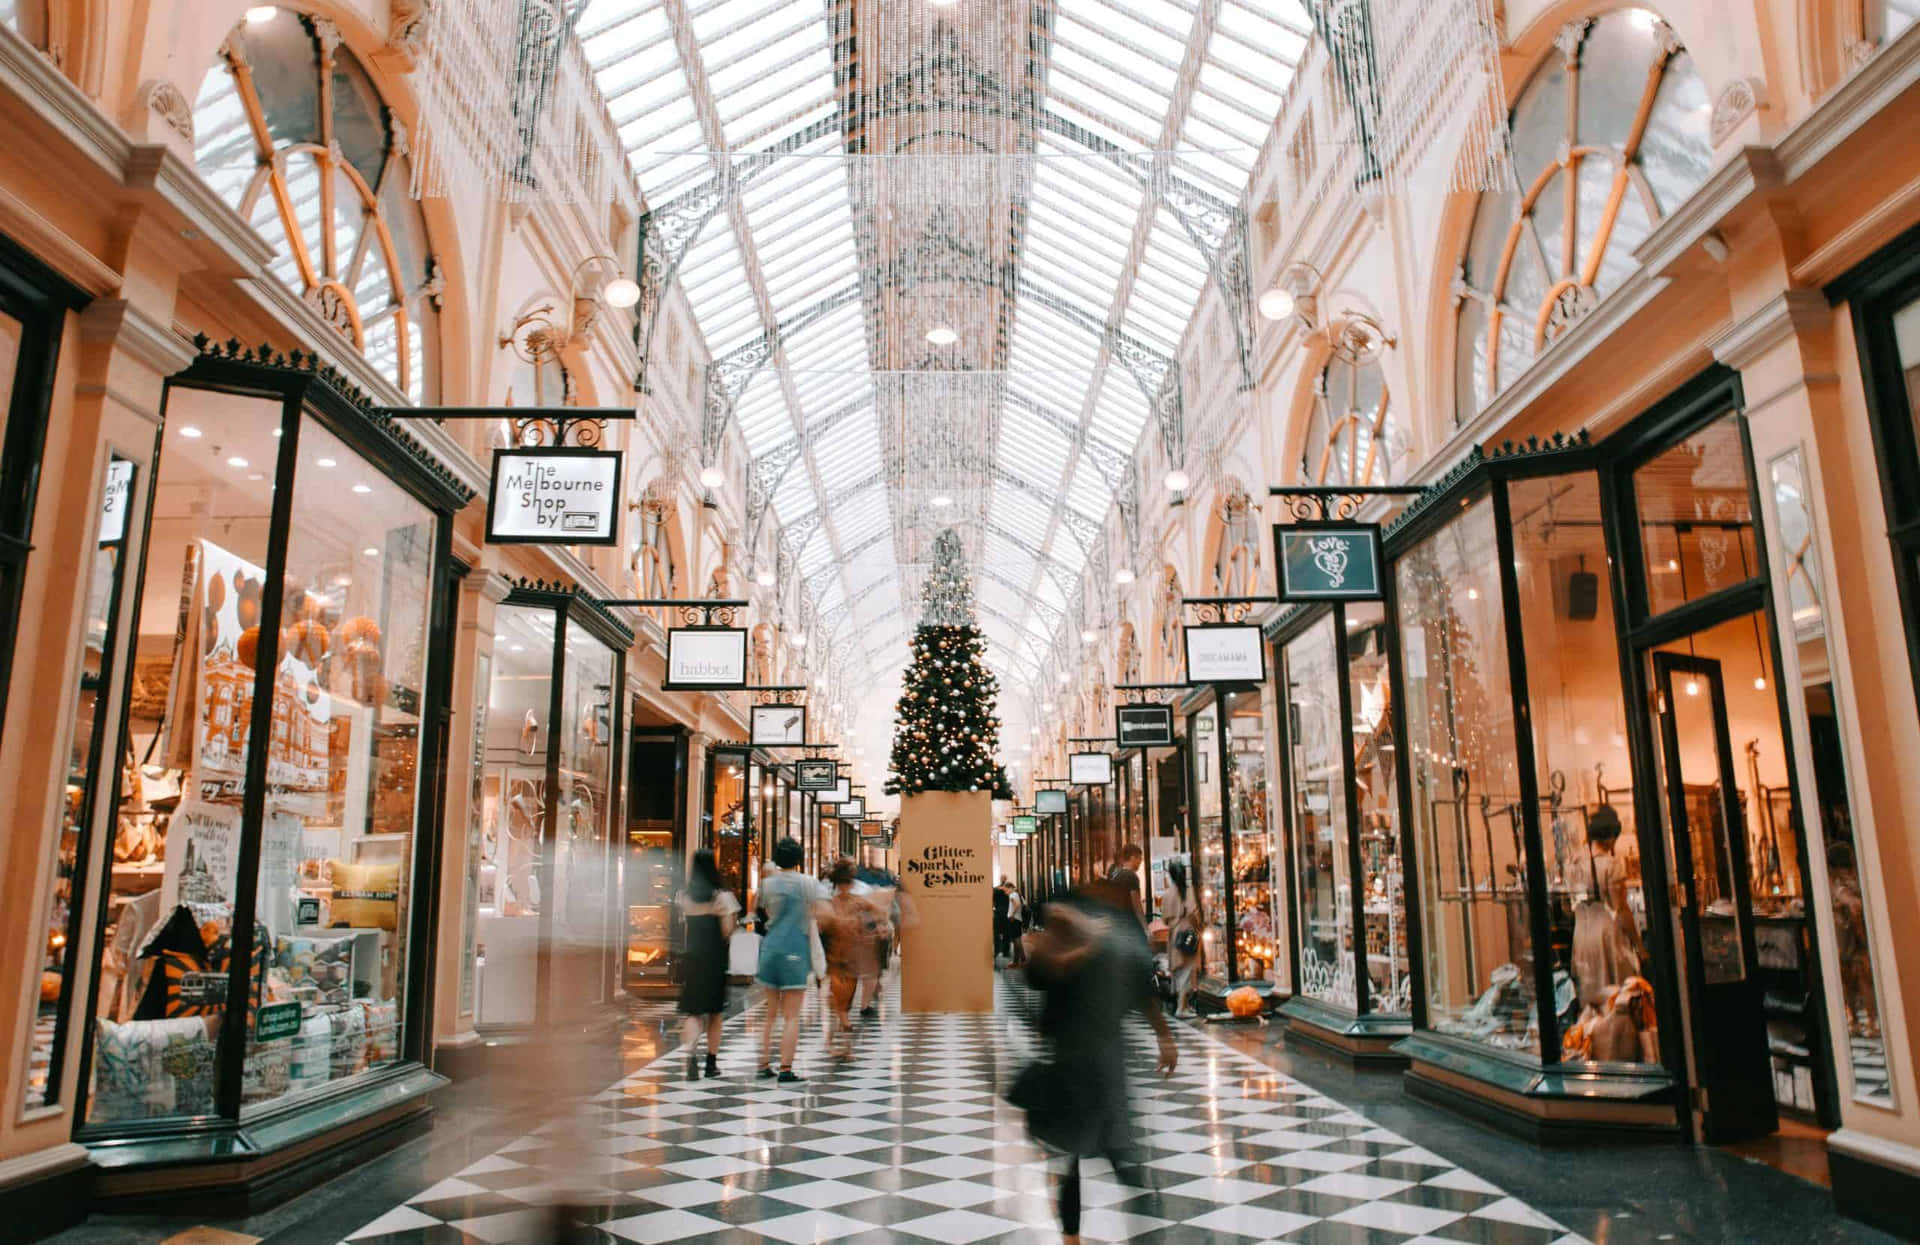 Download Royal Arcade Melbourne Interiorwith Christmas Decorations ...